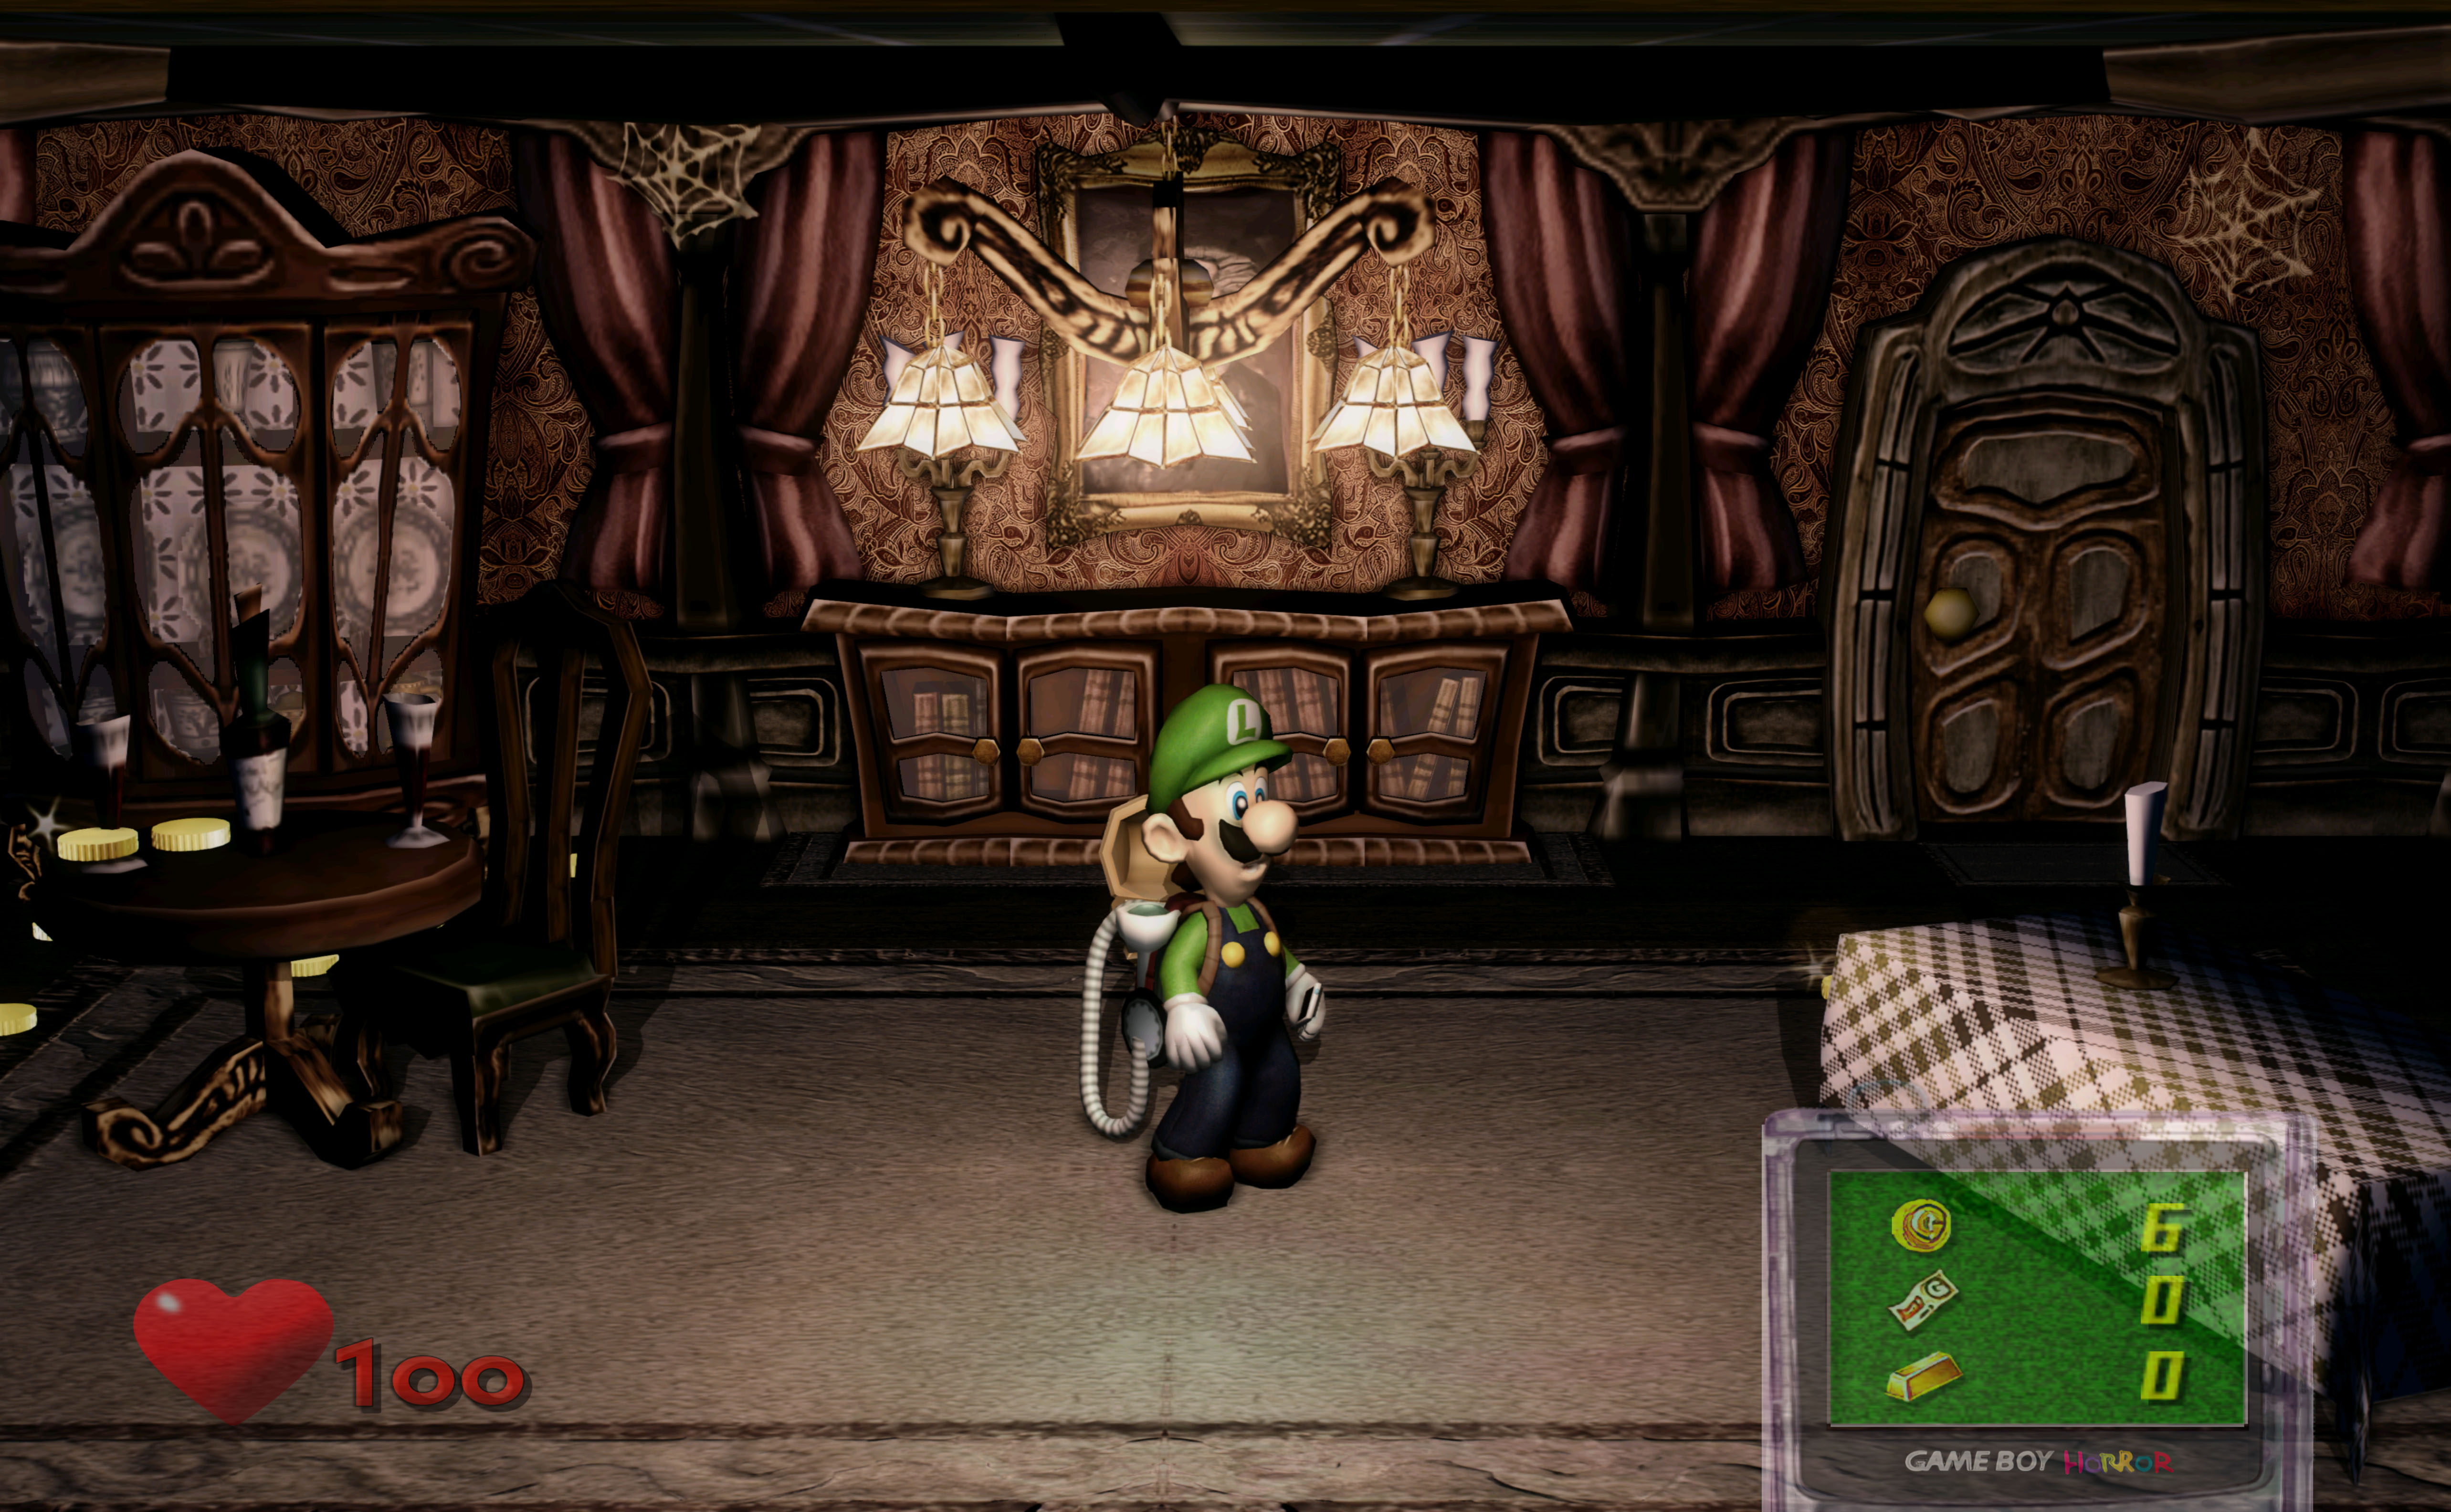 Luigi's Mansion: First-Person Optimized & HD Textures, Wii Dolphin